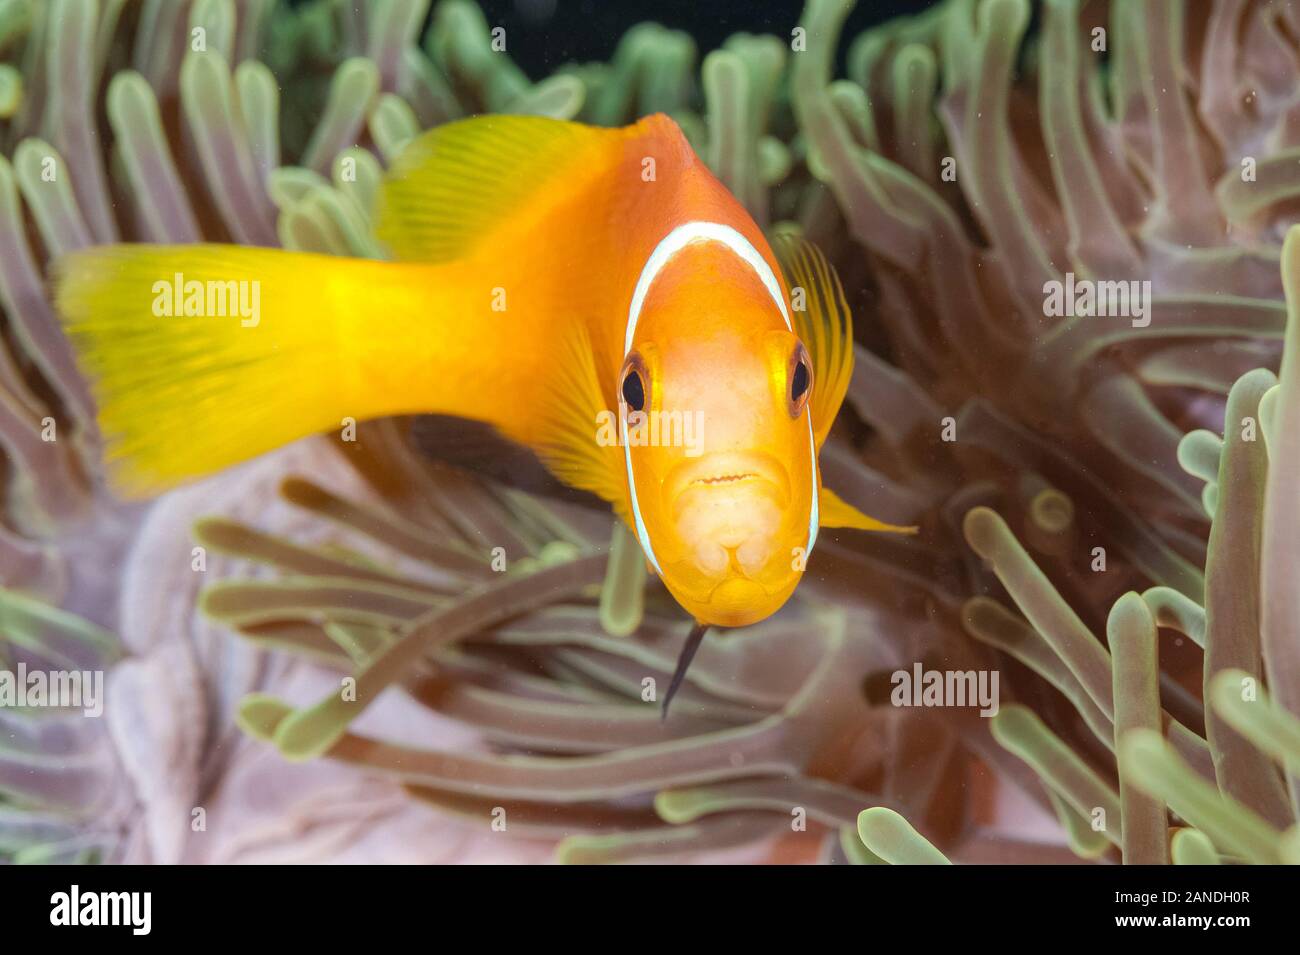 tomato clownfish, Amphiprion frenatus, in its host magnificent sea anemone, Heteractis magnifica, Maldives, Indian Ocean Stock Photo